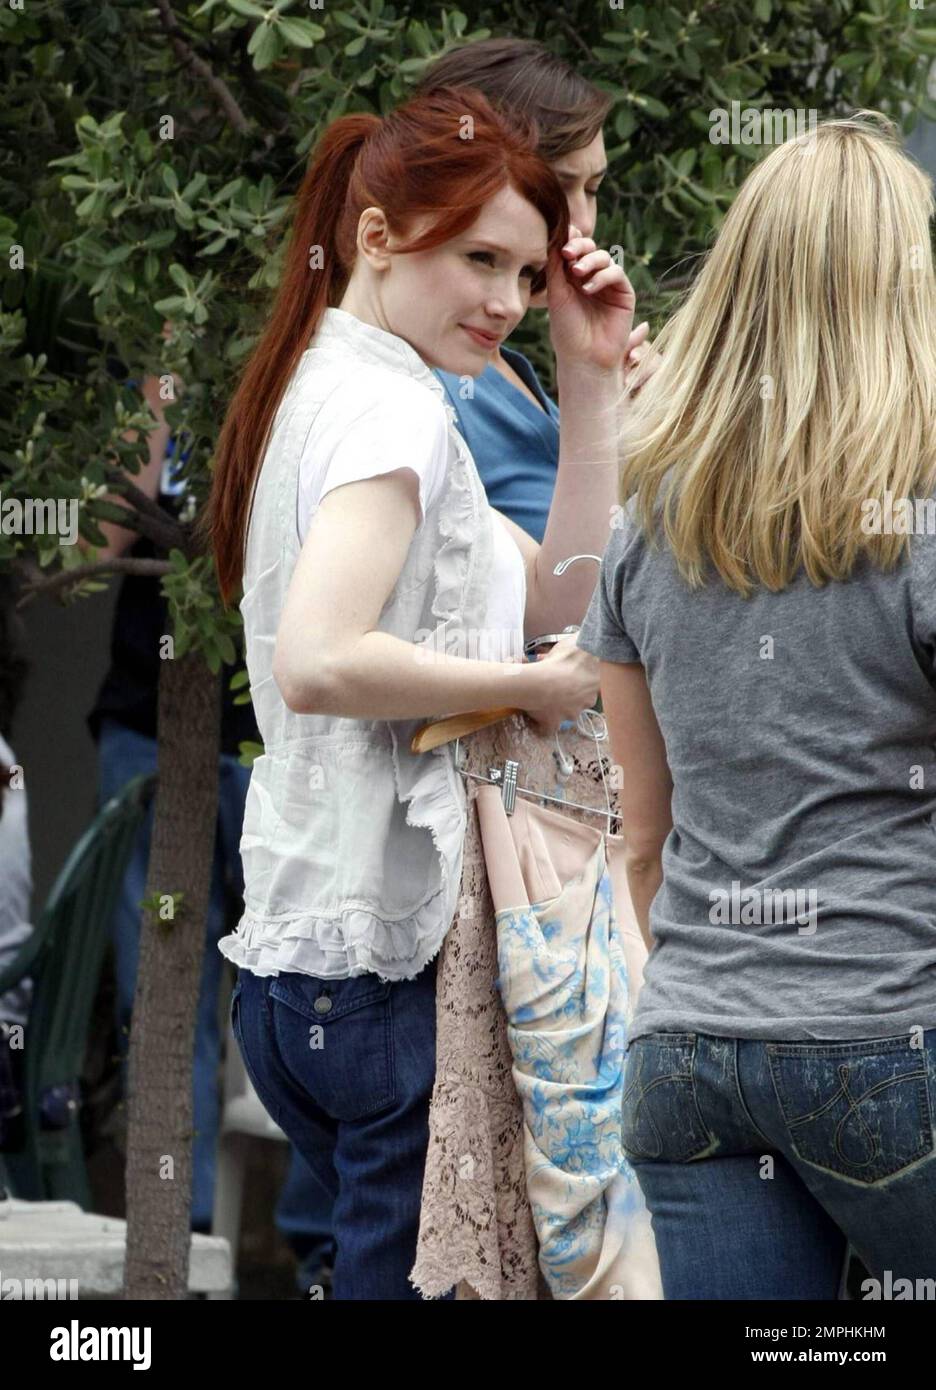 EXCLUSIVE!! Bryce Dallas Howard looks cute in a white top and jeans as she arrives for an appearance on the 'Chelsea Lately Show' to promote her new film 'Twilight Saga: Eclipse' in theaters today. Los Angeles, CA. 6/29/10. Stock Photo